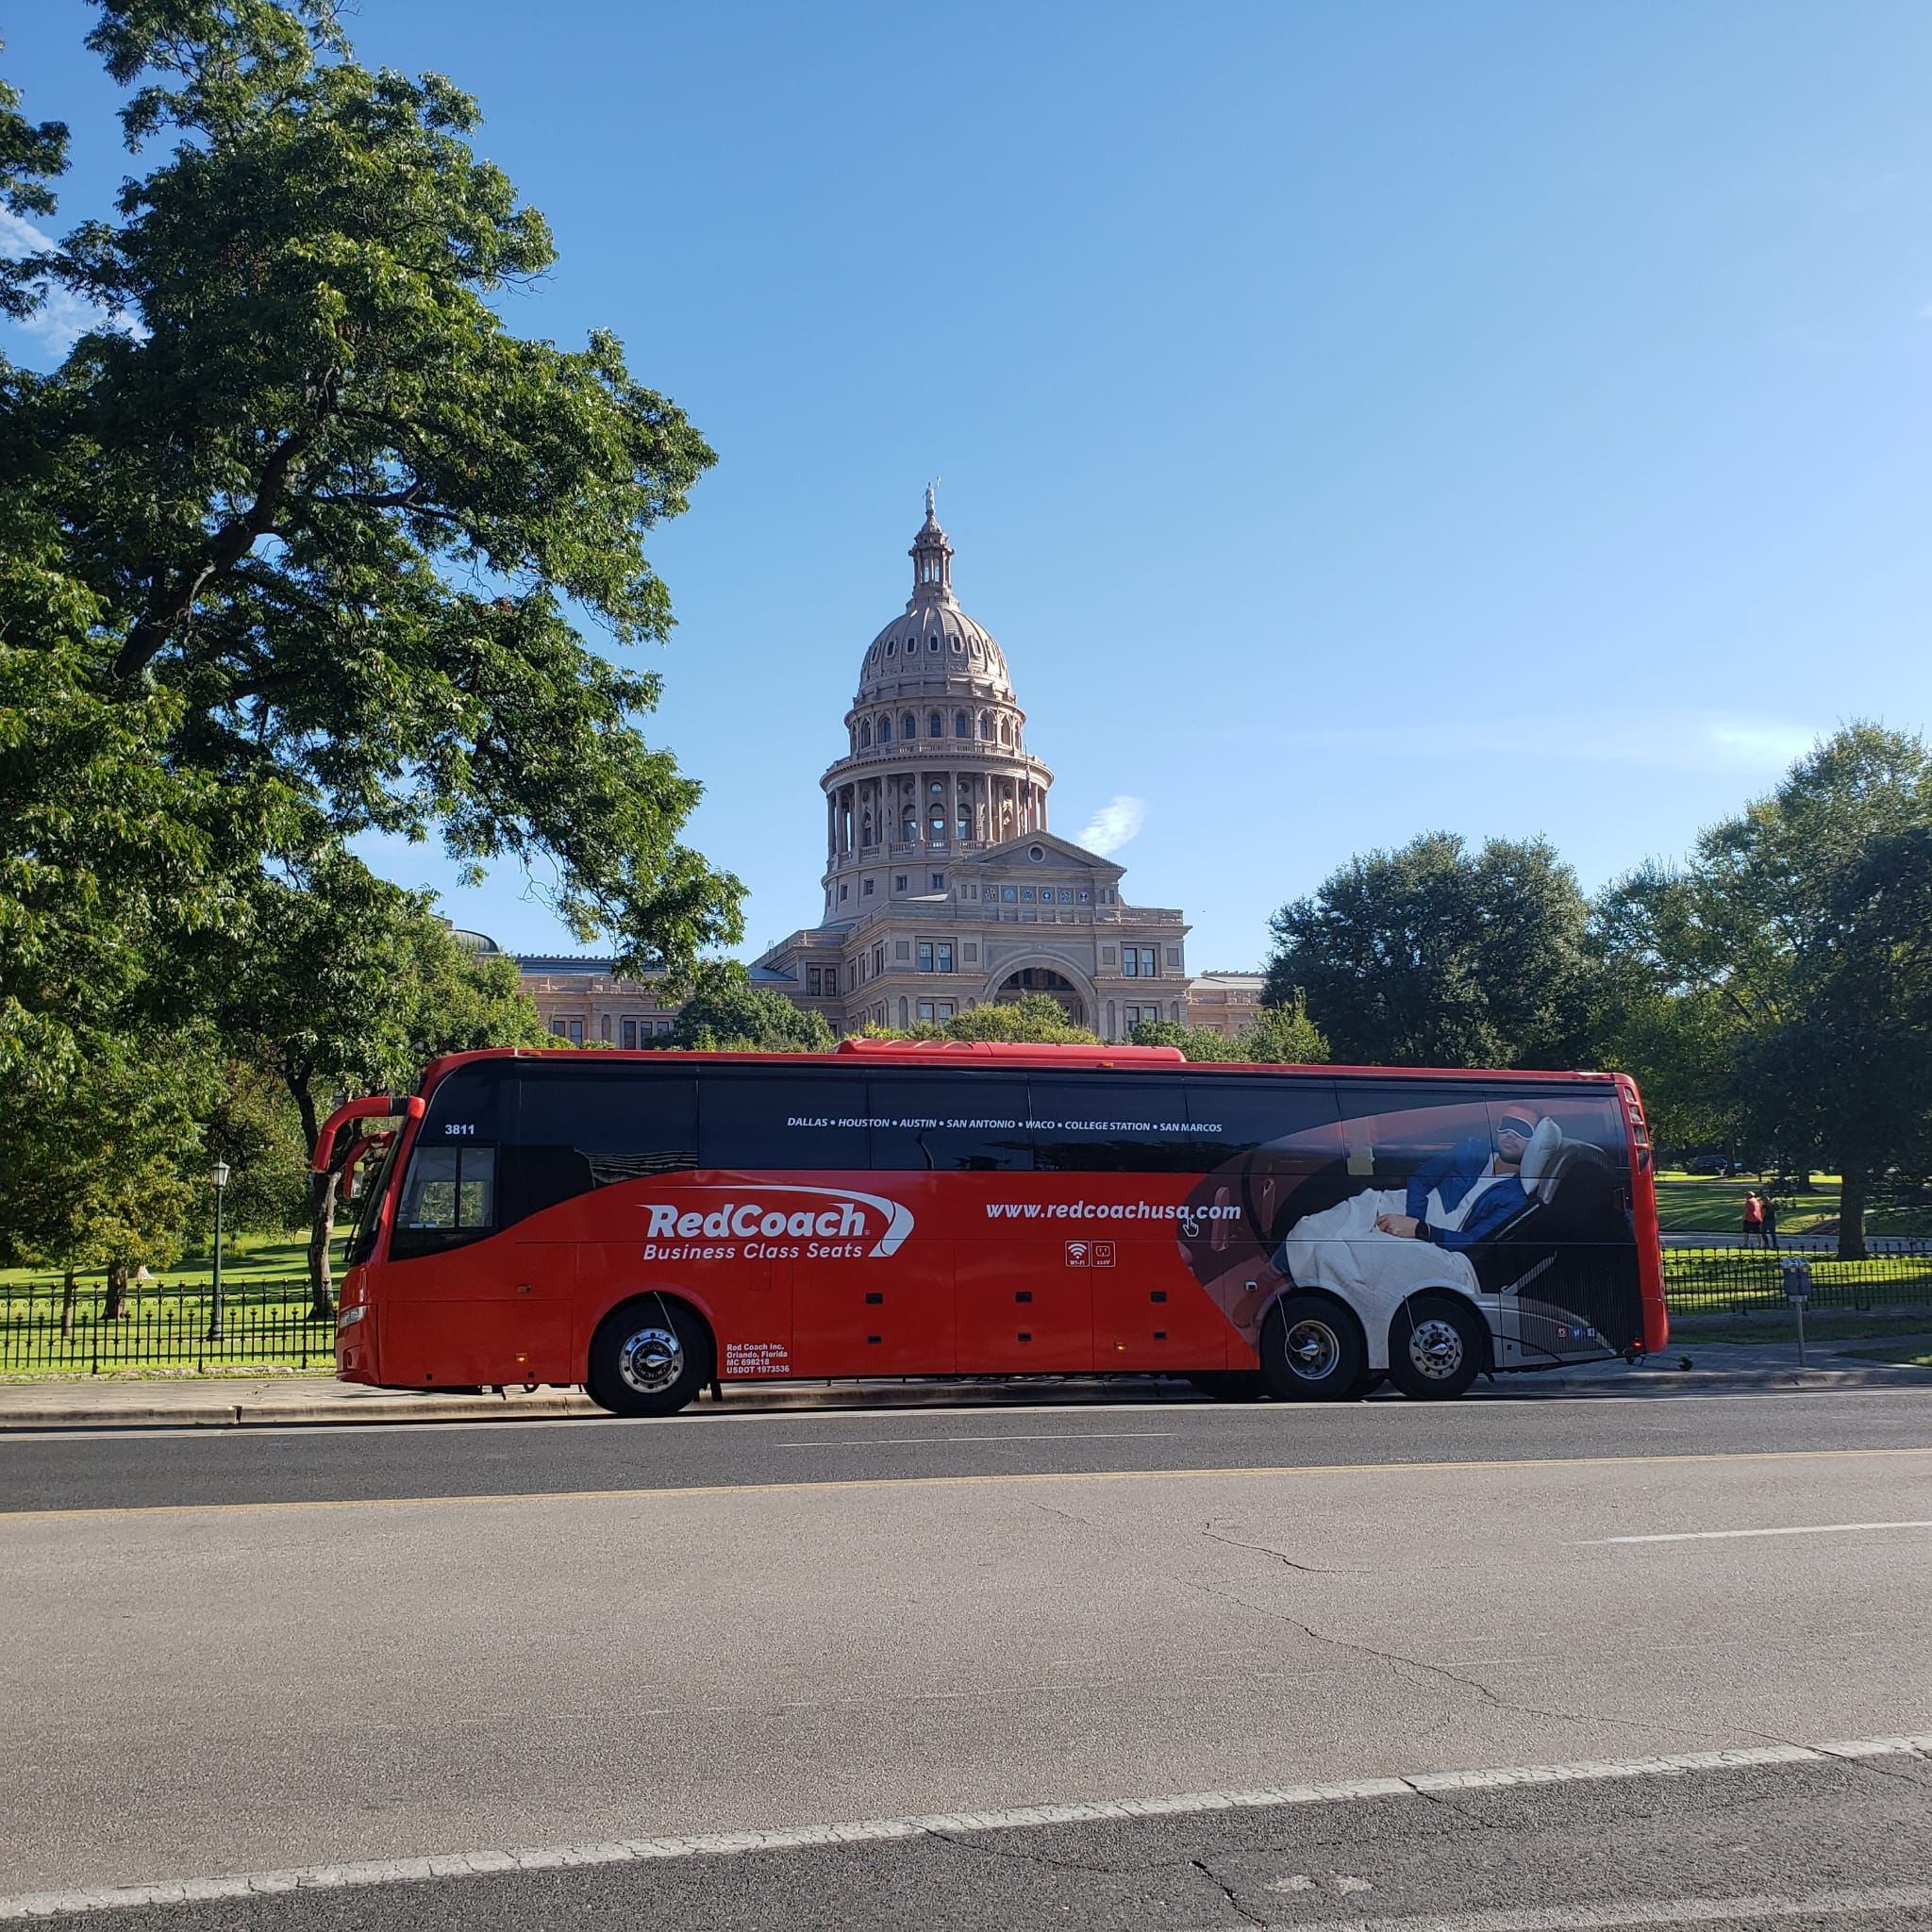 Intro Fare!  $15 Seats on RedCoach (Luxury Motorcoach) New Nonstop Texas Services For Houston Dallas Austin College Station & Waco - Book by November 16, 2021